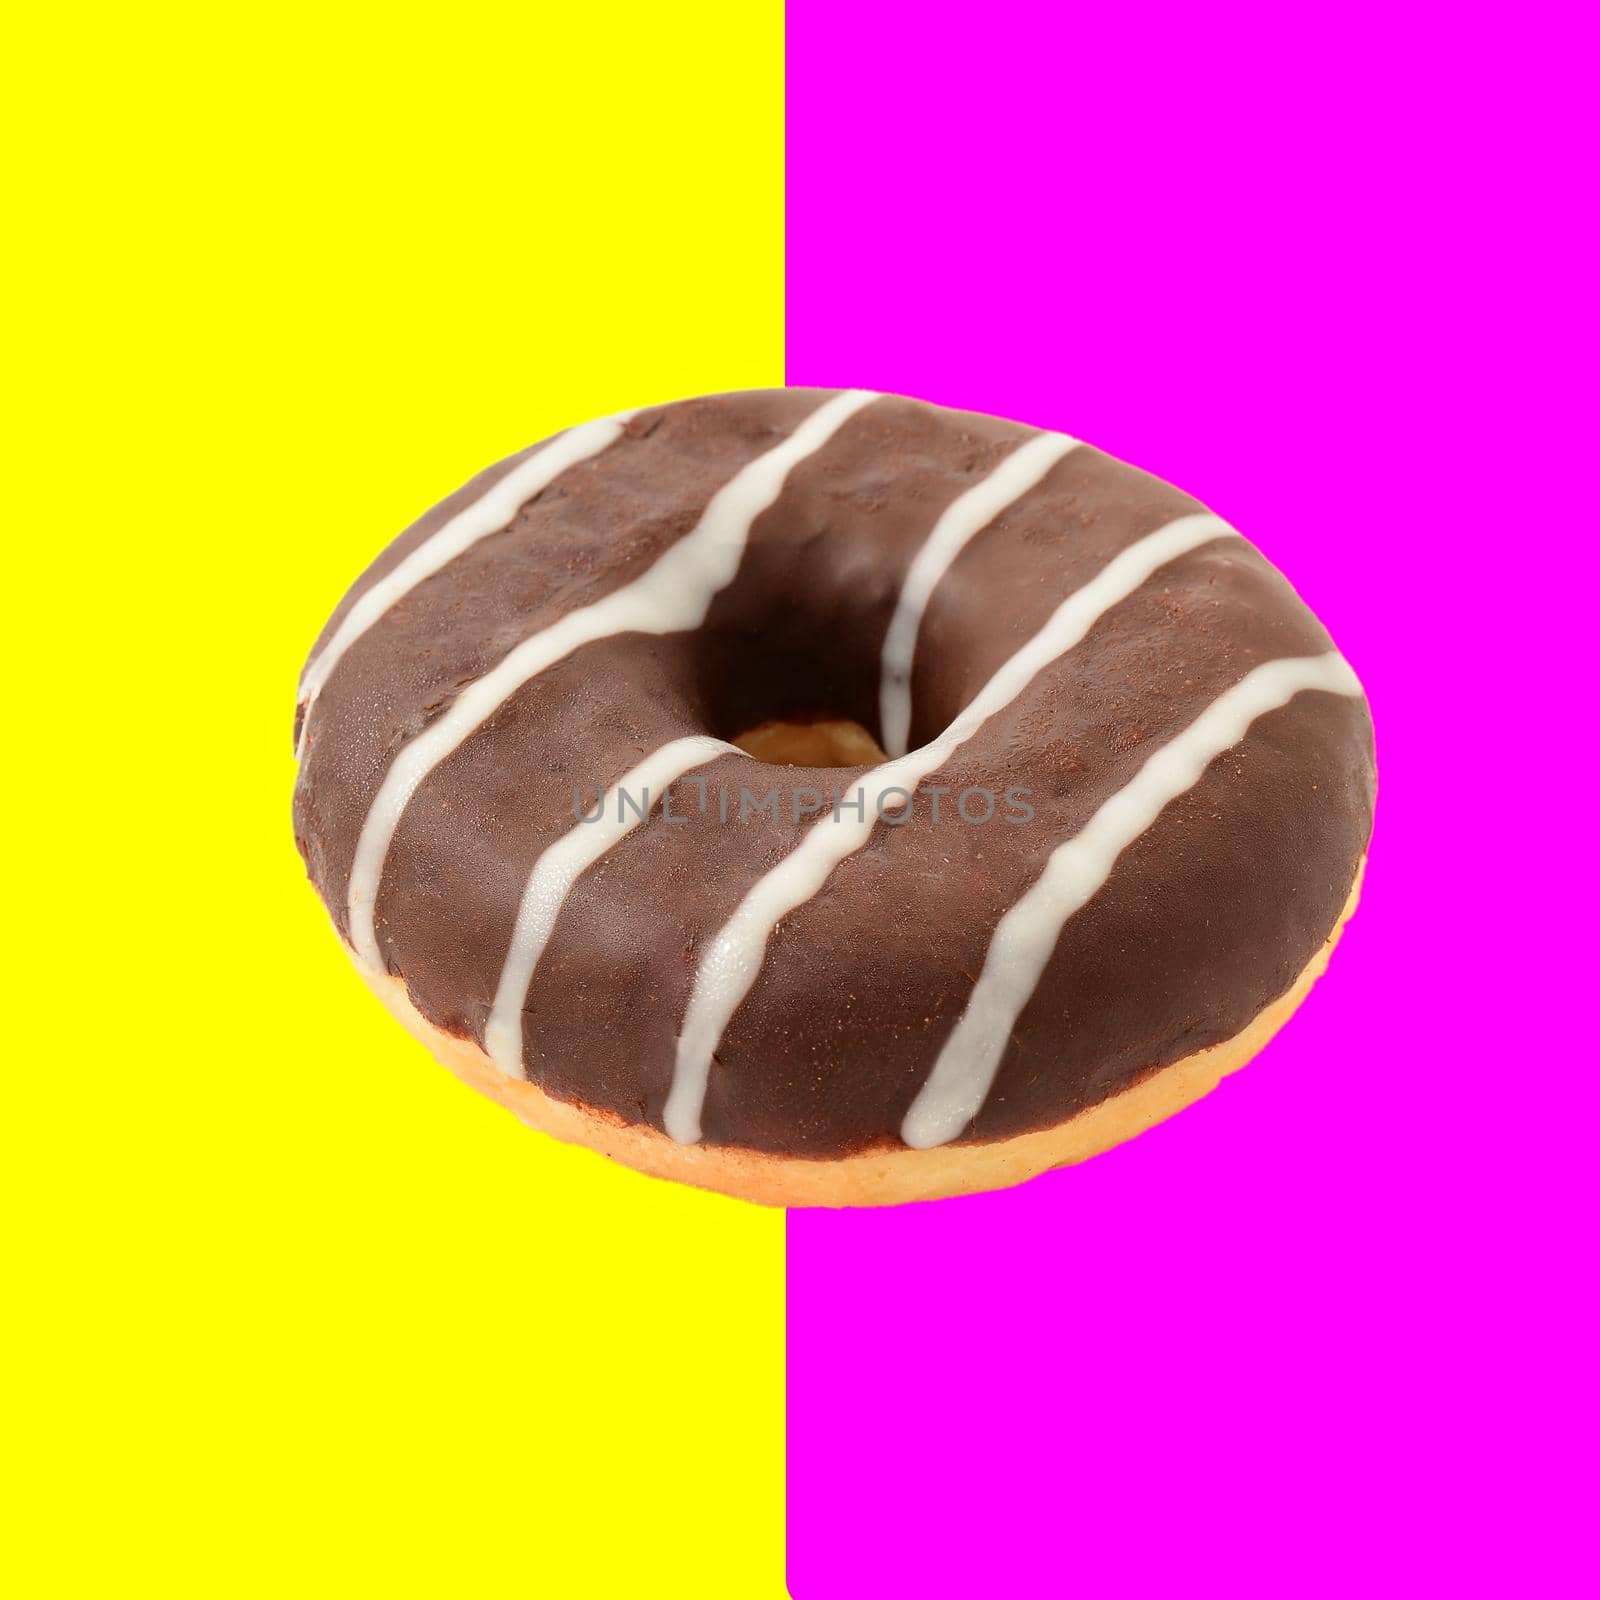 One whole chocolate donut isolated over half pink and half yellow background, retro vintage styled image.